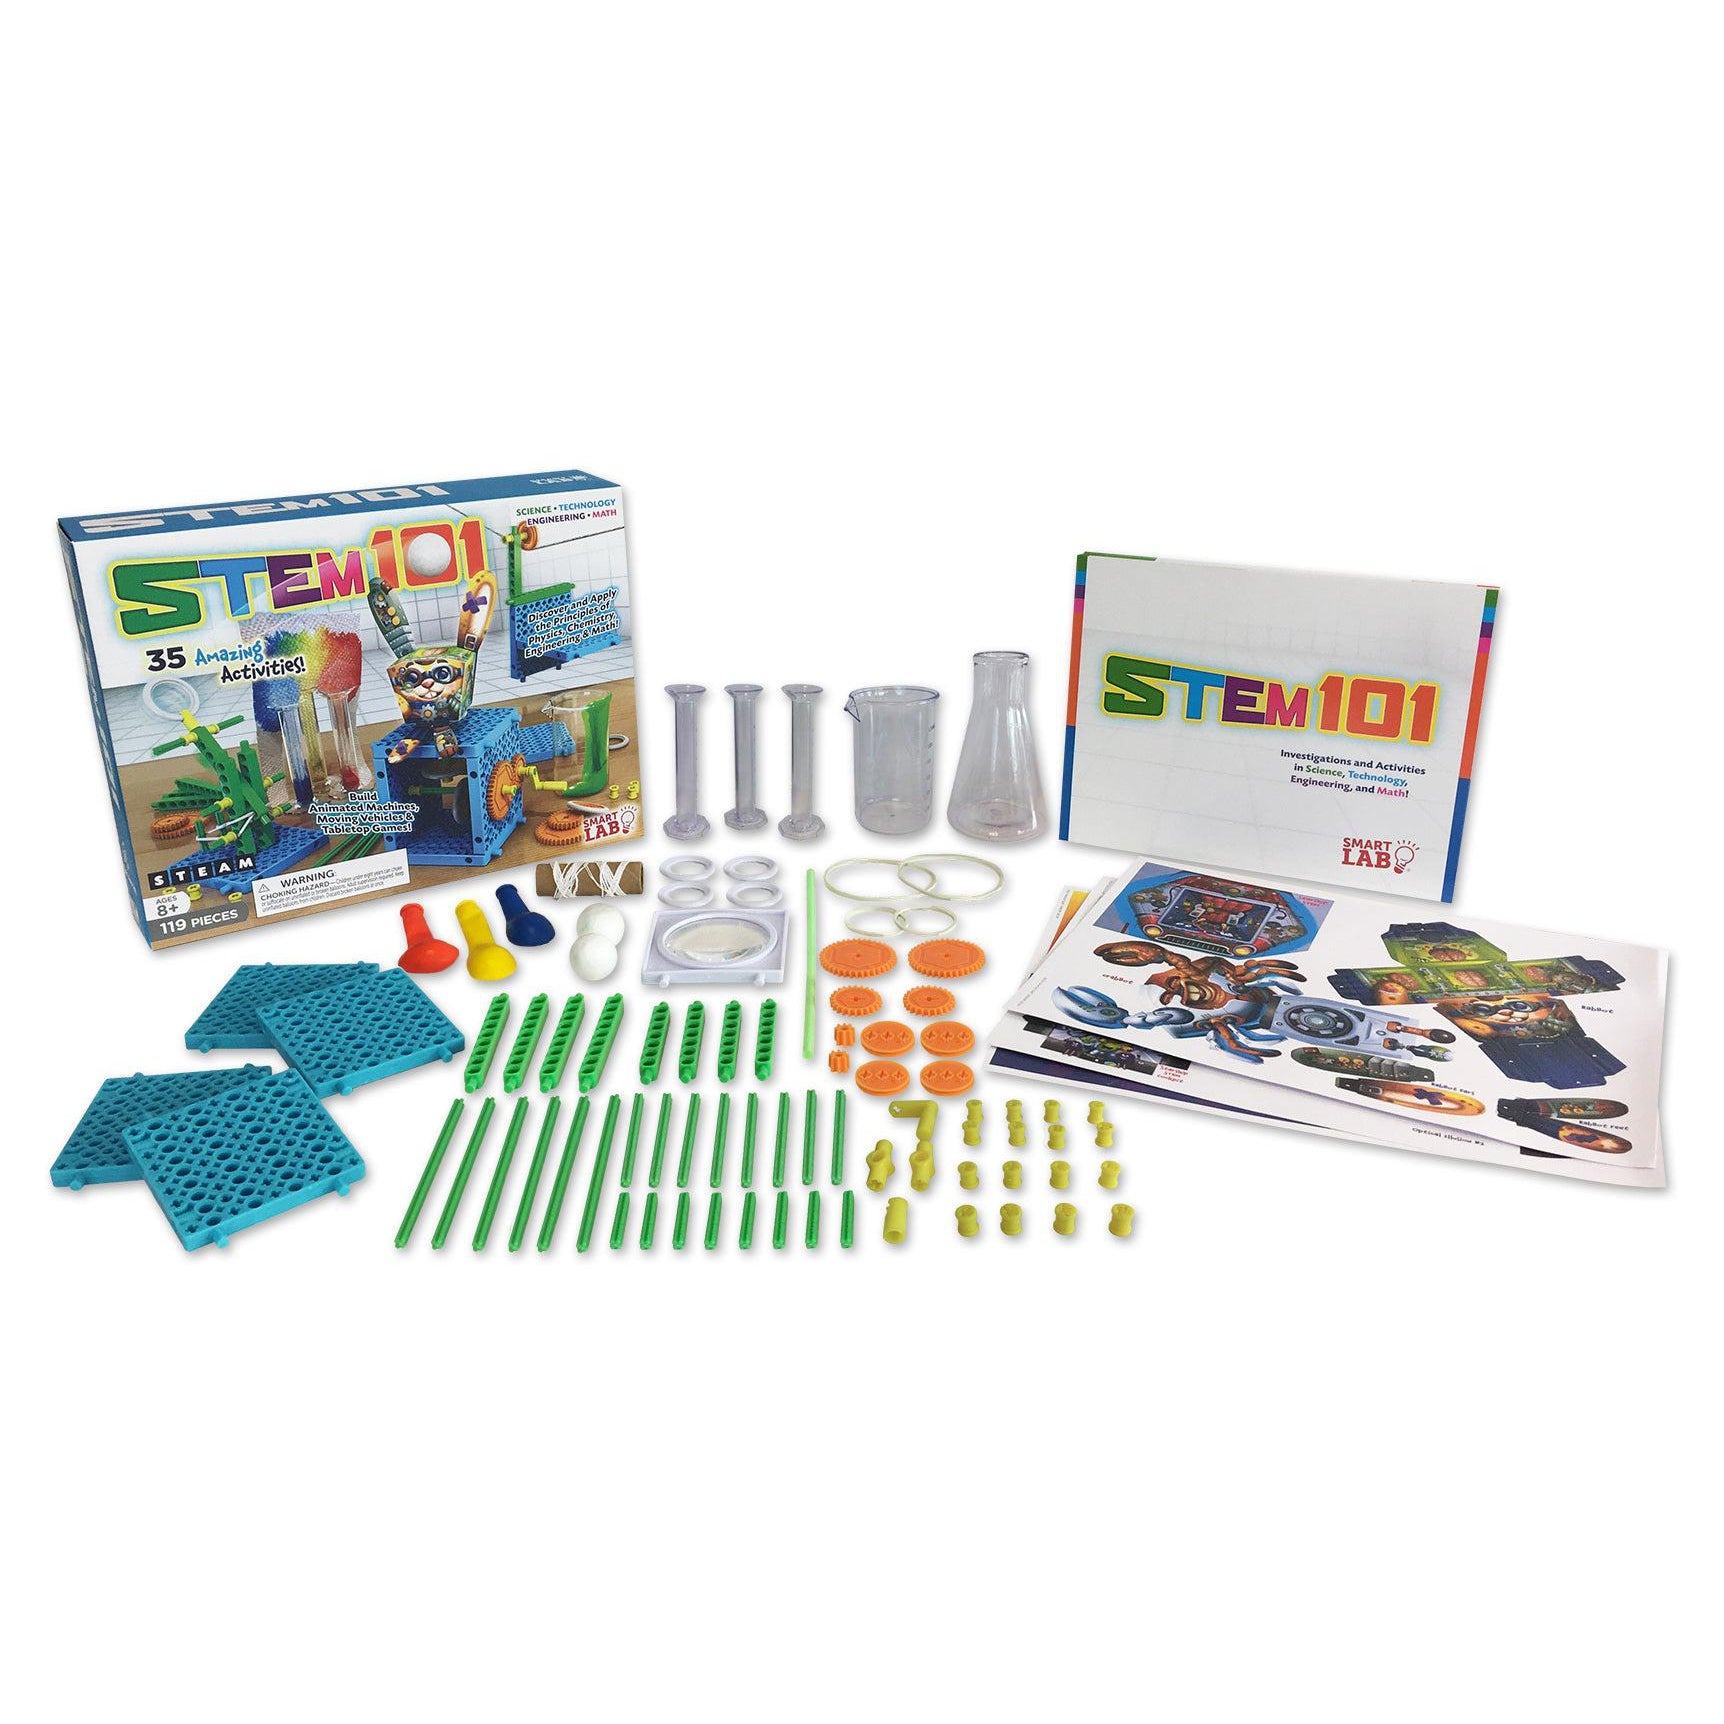 Front view of STEM 101 in its box.